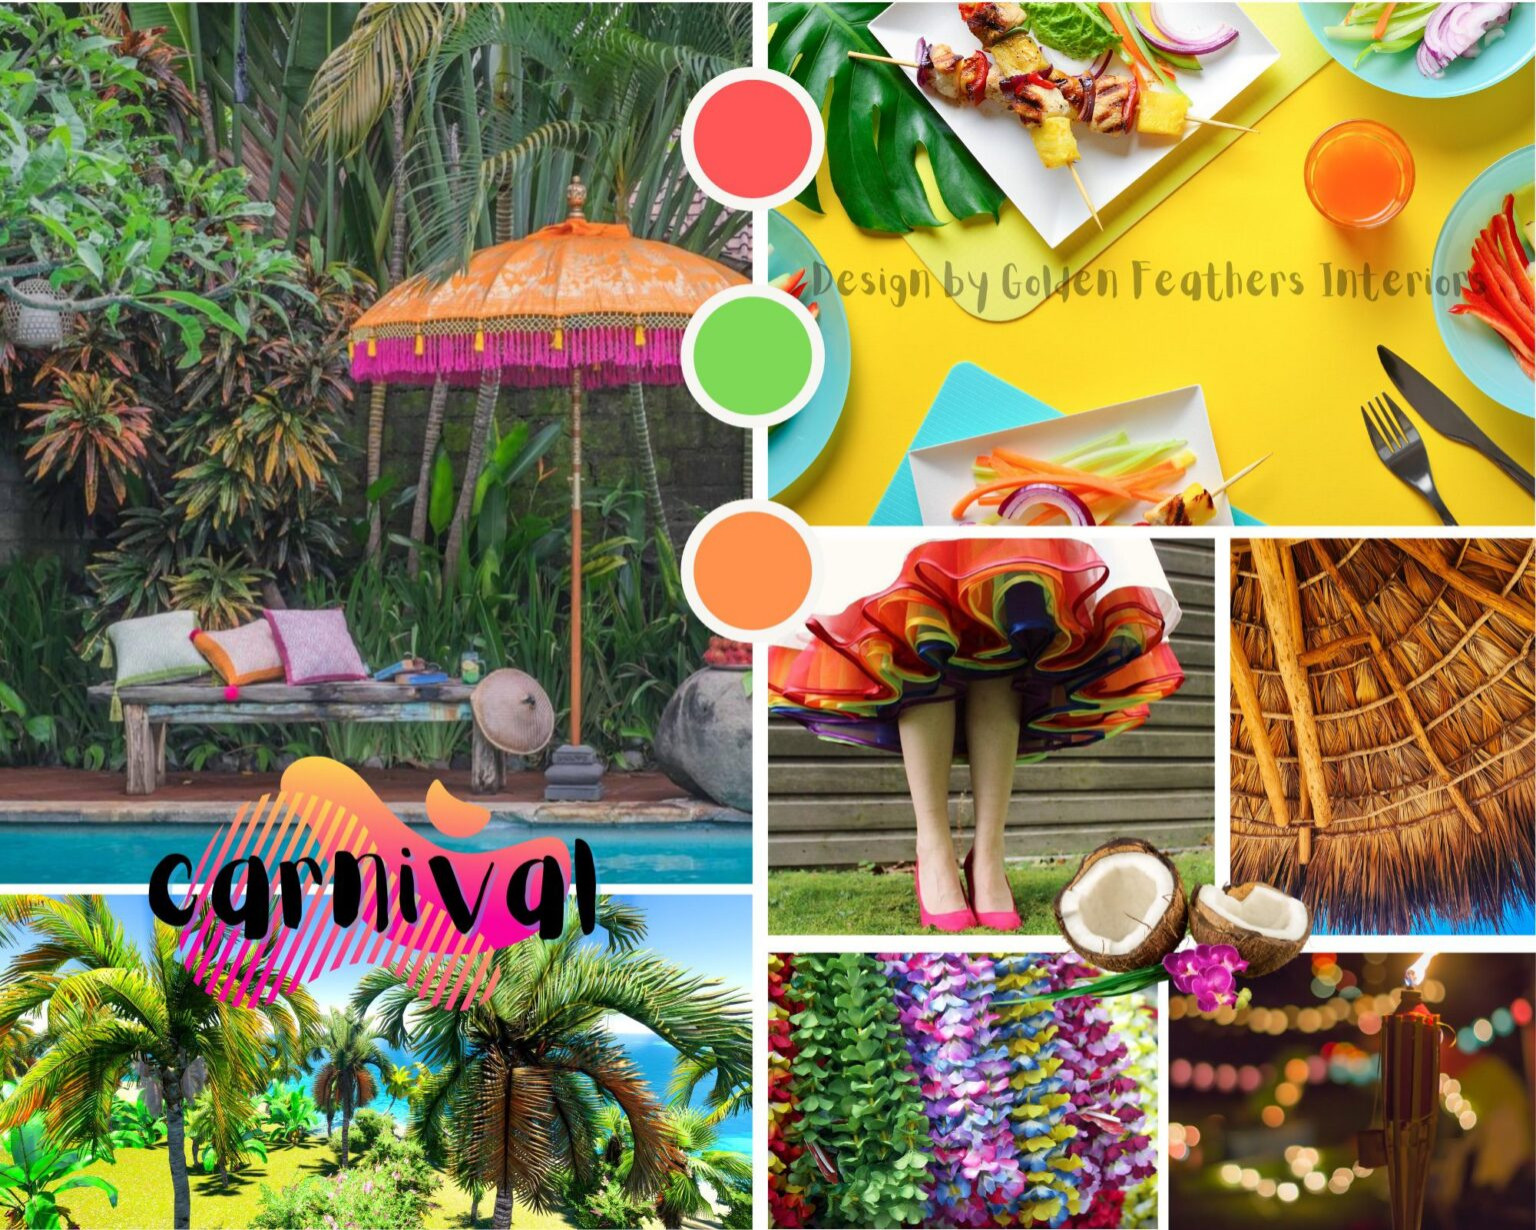 Carnival:  A celebration of all things, vibrant, fun and expressive. This is a design full of joy and positive, uplifting energy. Even on the greyest of days this scheme shouts Happiness!